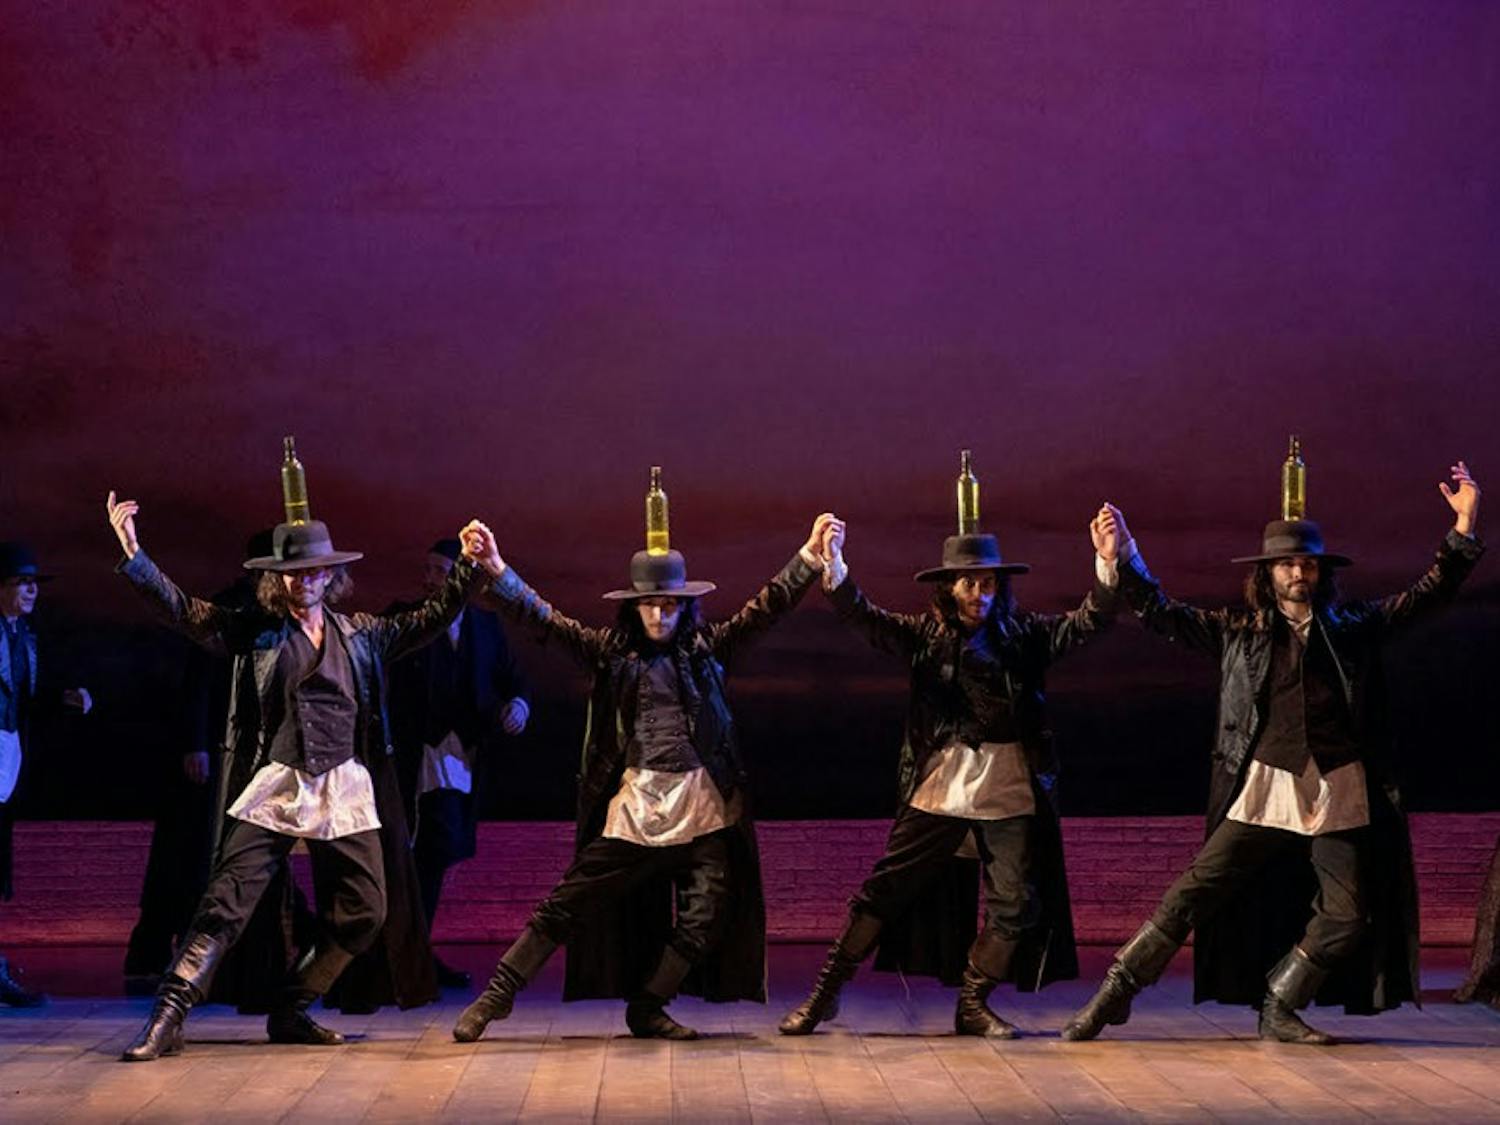 “Fiddler on the Roof” opens at Shea’s as a part of its Broadway Series. The show brings an influx of musical numbers and complex dancing, all centered around the Jewish culture.